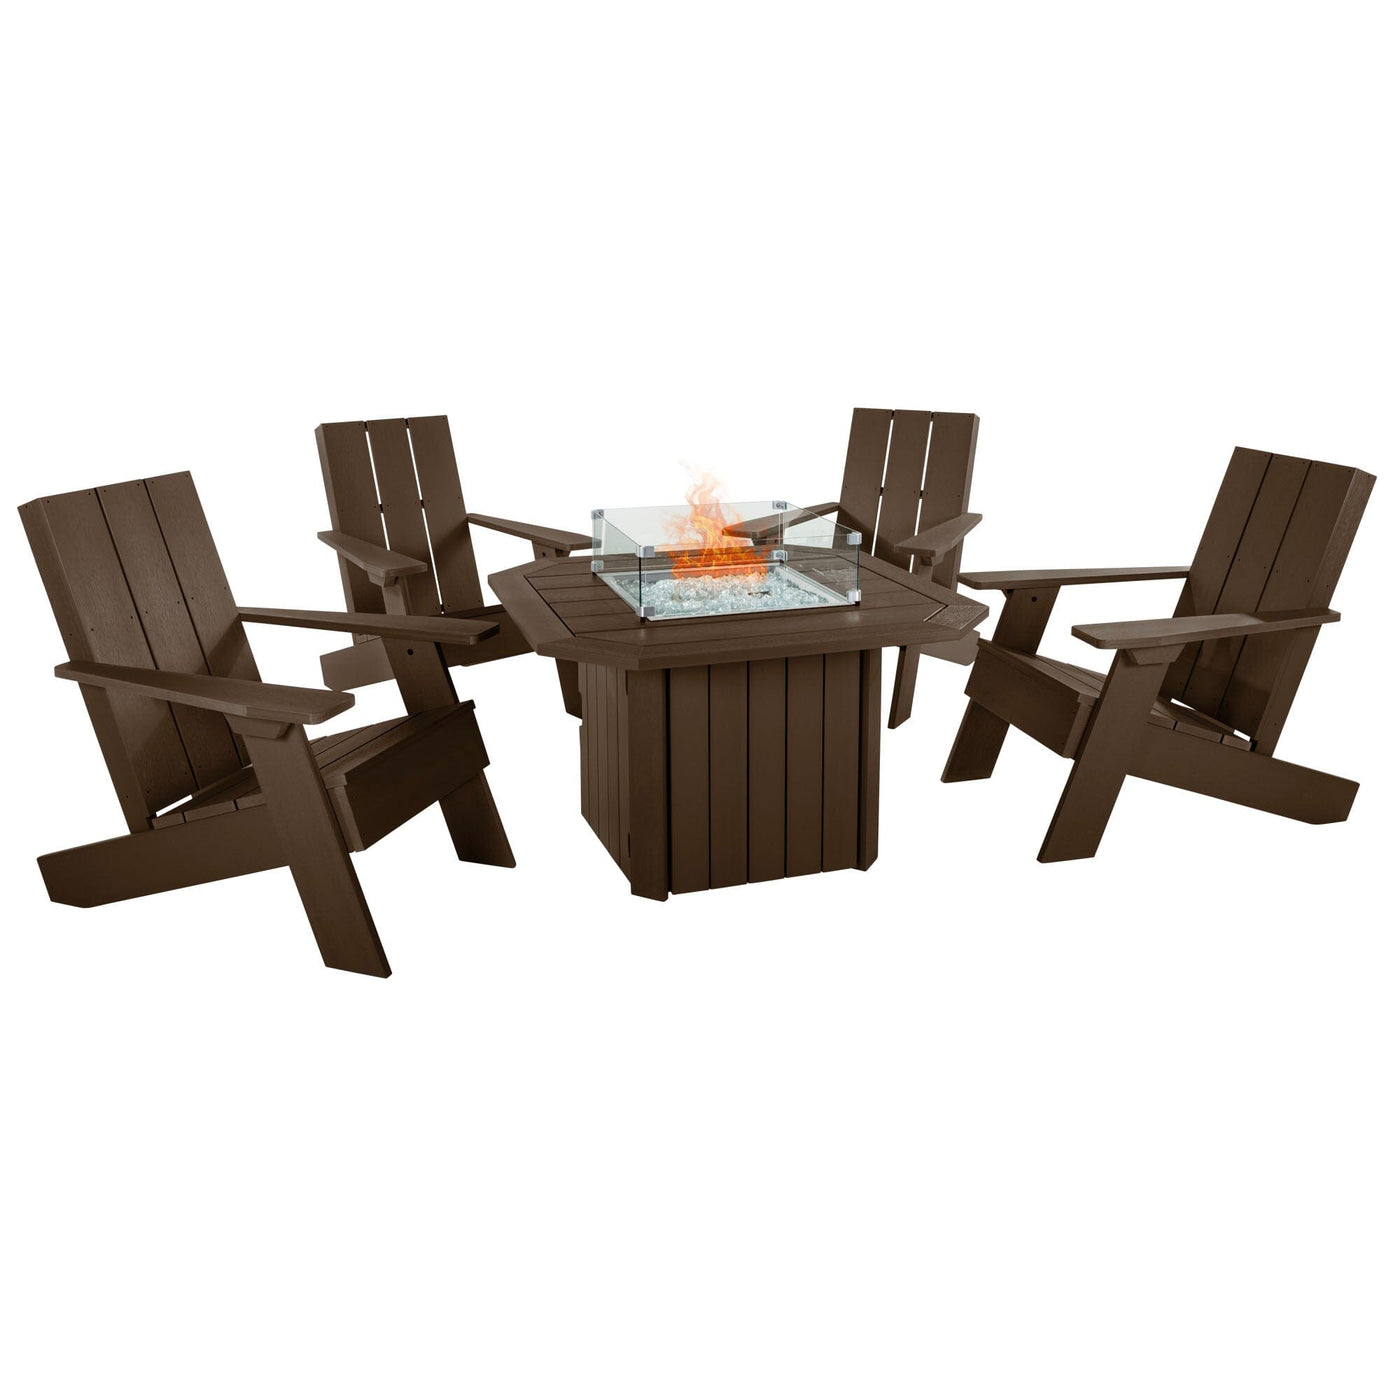 Italica Modern Adirondack 5-Piece Conversation Set with Fire Pit Table Kitted Sets Highwood USA Weathered Acorn 